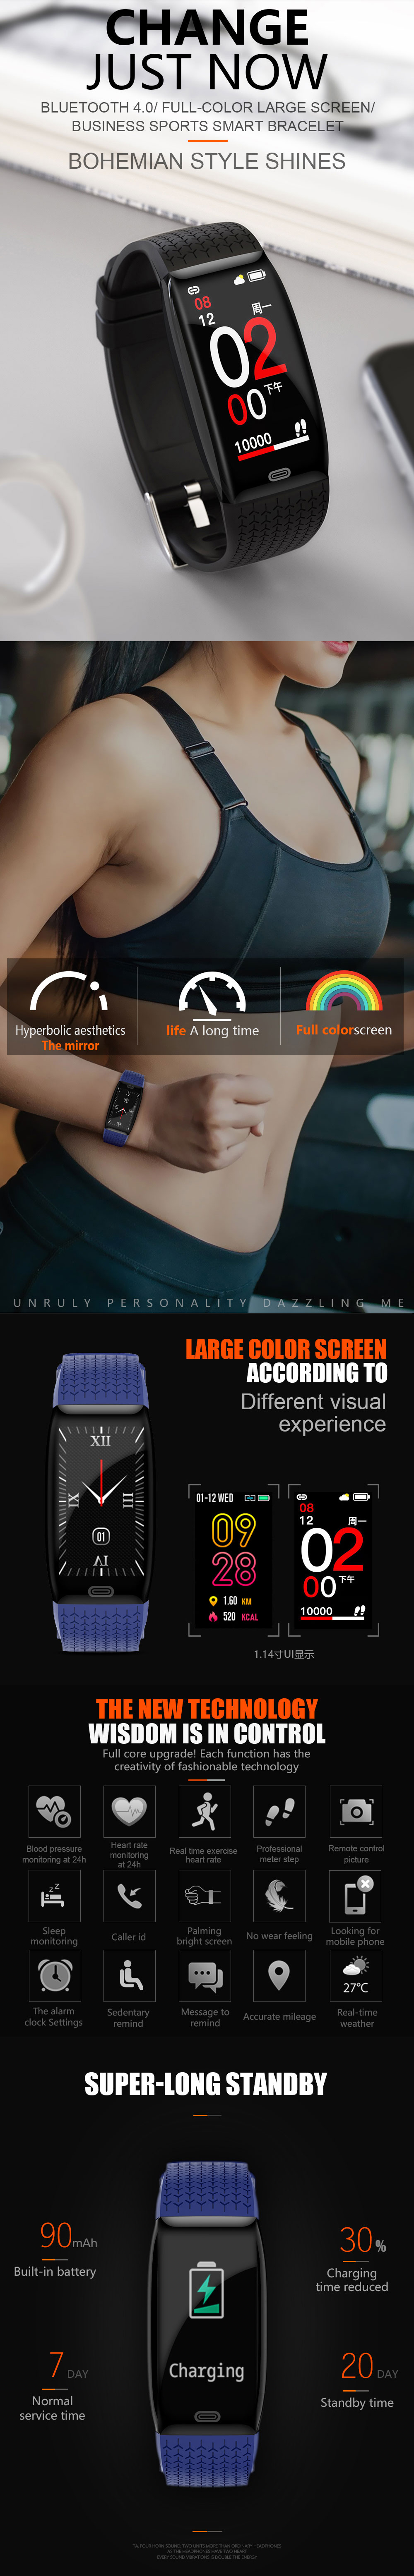 Bakeey S2 1.14' Big Screen Wristband Heart Rate Monitor Fitness Tracker USB Charger Smart Watch 12